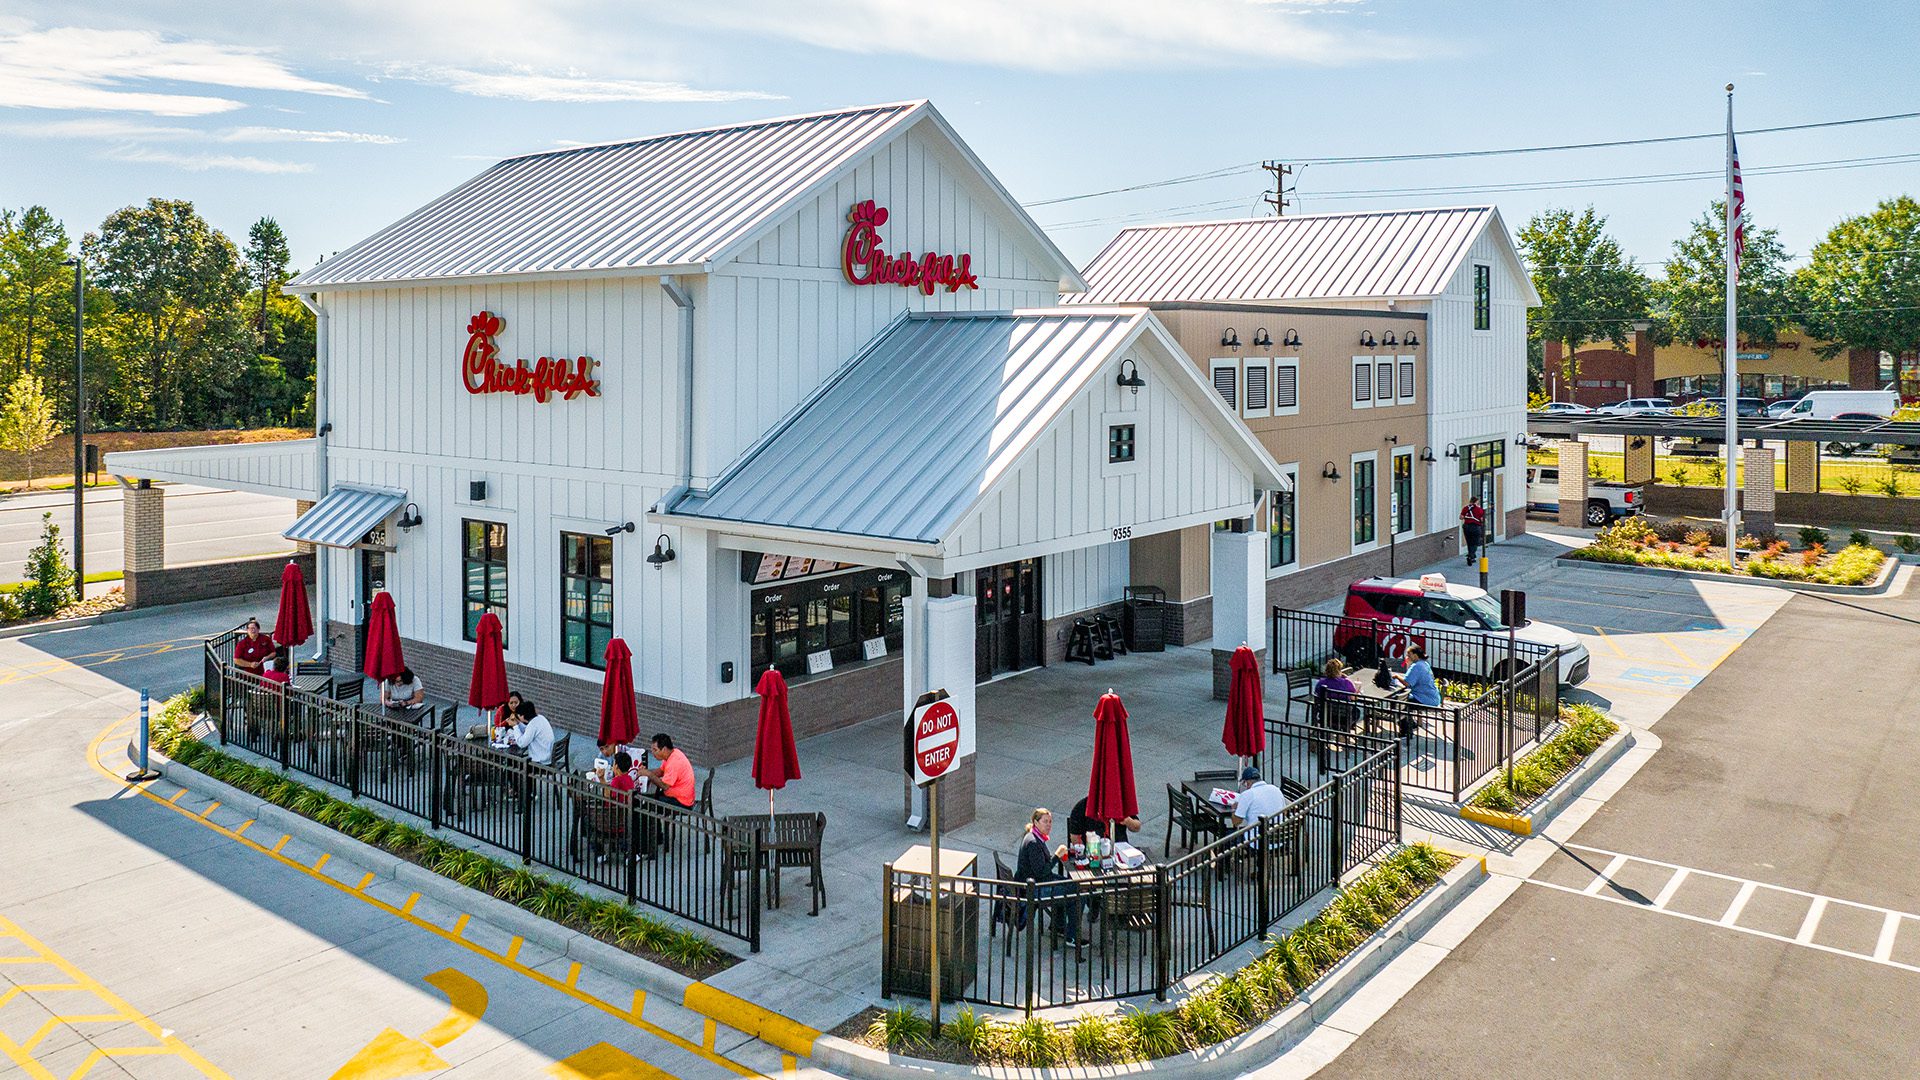 Chick-fil-A restaurant at Farmington white farm style building with patio seating